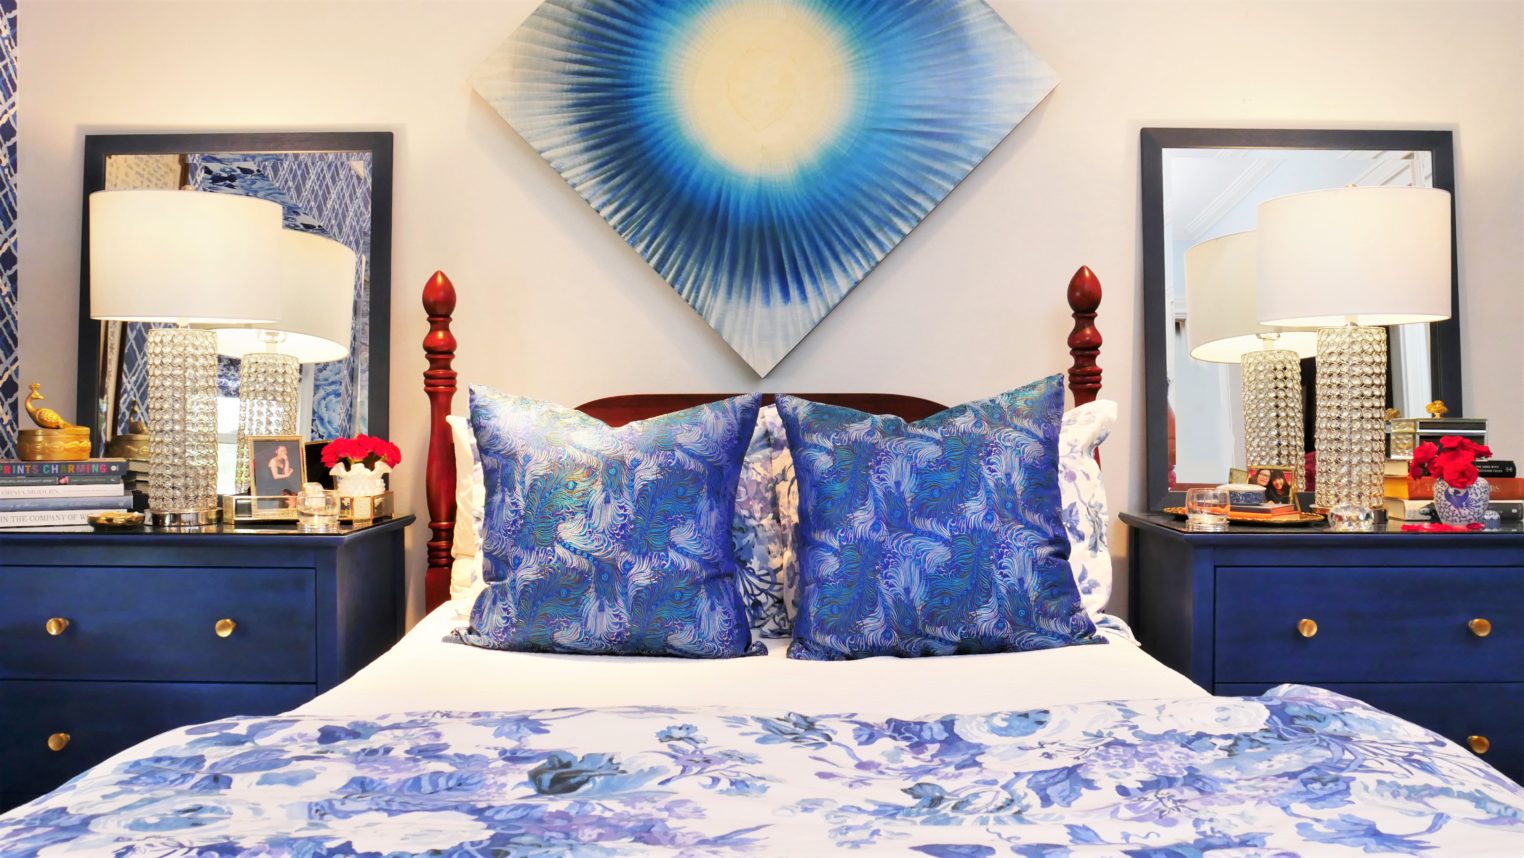 Peacock Alley luxury bedding with Deborah Main pillows and Roi James painting. Details on The Pillow Goddess Blog!